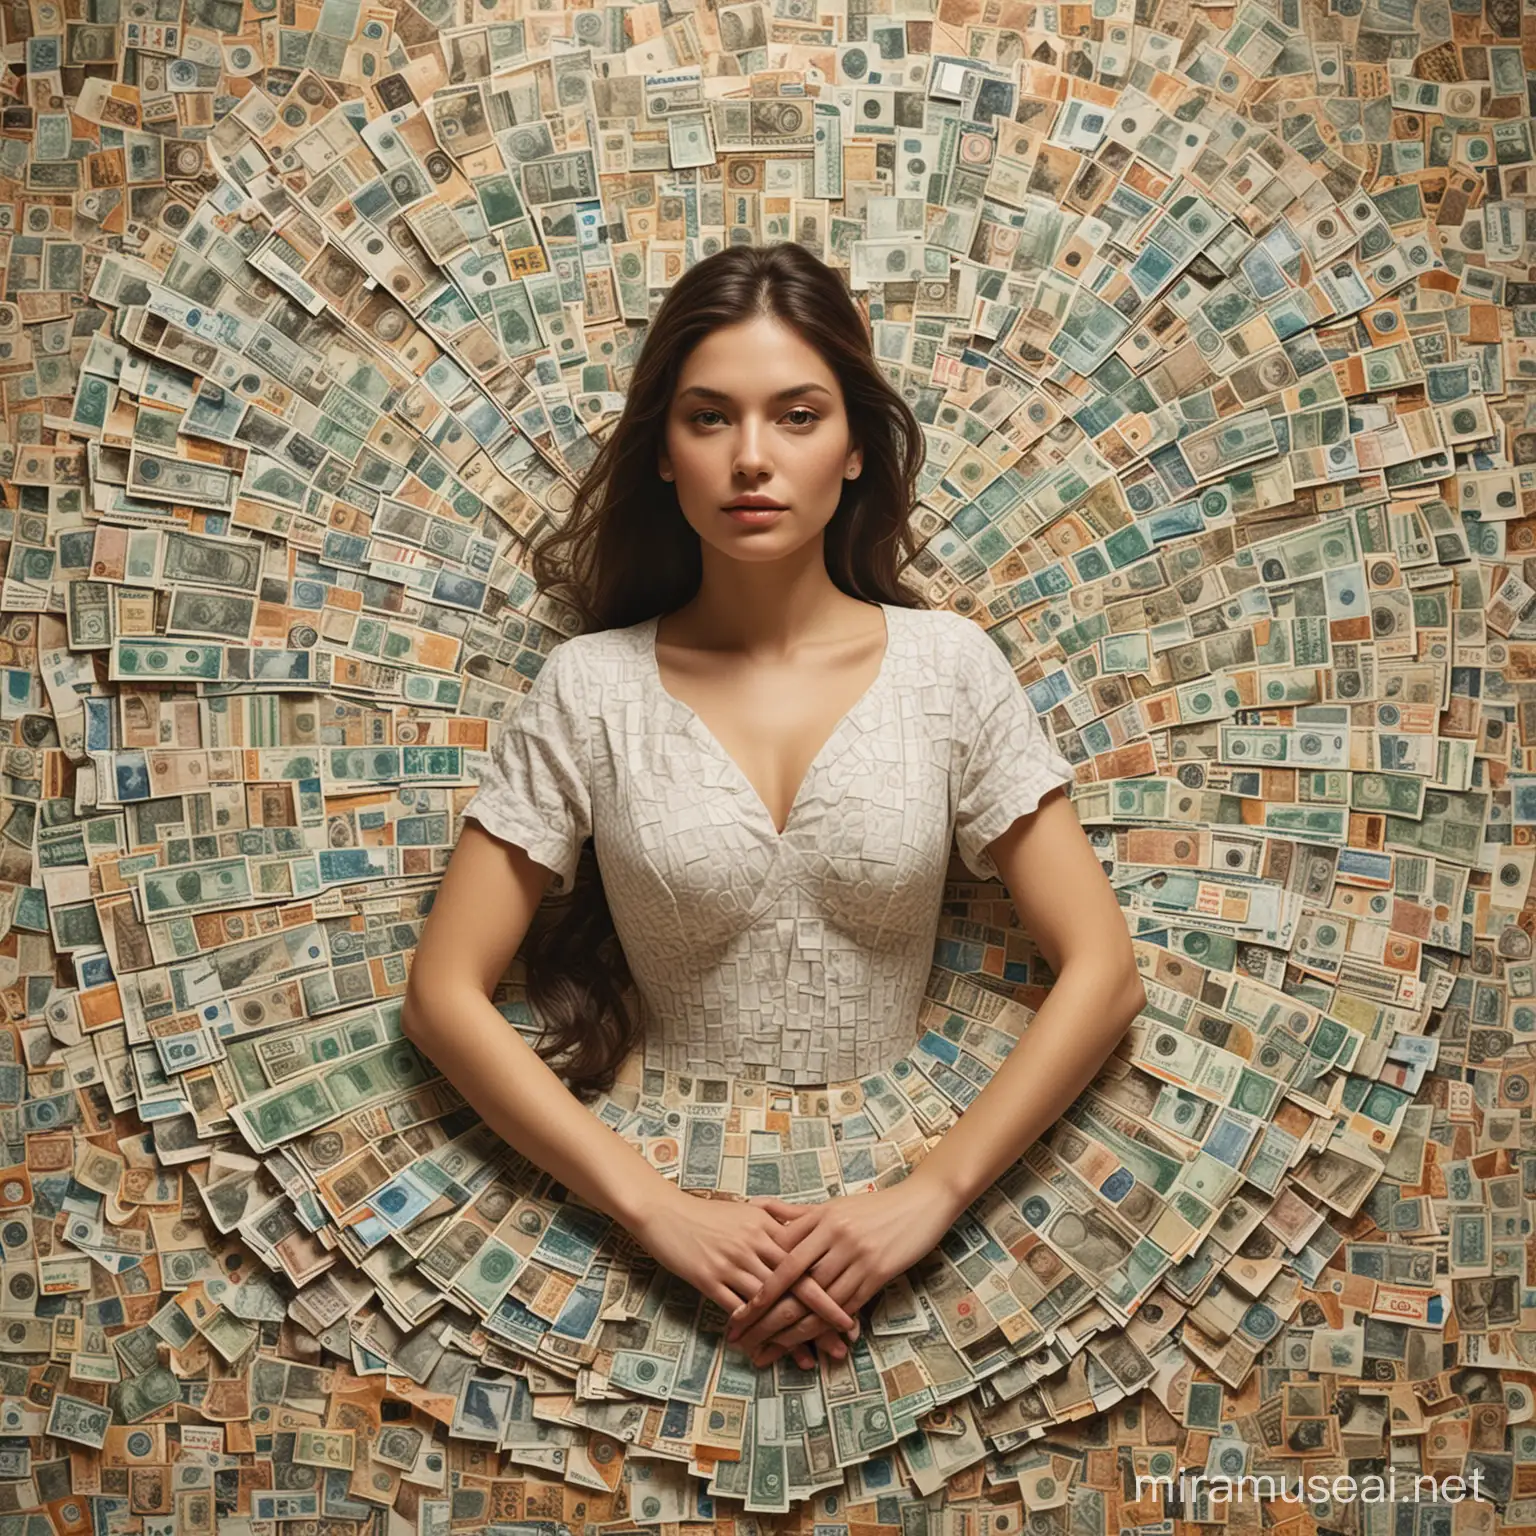 A woman is elegantly depicted within a heart-shaped collage composed of various global currency bills. Each bill contributes its unique design and color palette, coming together to form a vibrant mosaic that symbolizes the diverse and universal allure of wealth. The intricate arrangement of the bills creates a visually striking background that underscores the interconnectedness of different monetary systems and the global nature of prosperity.
The woman, positioned at the center of the heart-shaped collage, radiates confidence and grace. Her arms are raised in a graceful gesture, framing her face and exuding a sense of poise and self-assuredness. She is seamlessly integrated into the composition, with her attire and the background sharing similar hues, creating a visual harmony that suggests a profound connection between individual identity and economic landscapes.
This artistic juxtaposition of the woman within the currency collage serves as a thought-provoking commentary on the complex interplay between monetary value and human essence. By intertwining the concept of wealth with personal presence, the image invites contemplation on the intricate relationship between financial worth and intrinsic worth, highlighting the ways in which economic systems intersect with individual identity and self-worth. Overall, this visually compelling composition offers a nuanced exploration of the intersections between economy and identity, inviting viewers to reflect on the multifaceted nature of wealth, value, and personal expression in a world where monetary symbols and human experiences are intricately intertwined, 32k render, hyperrealistic, detailled.